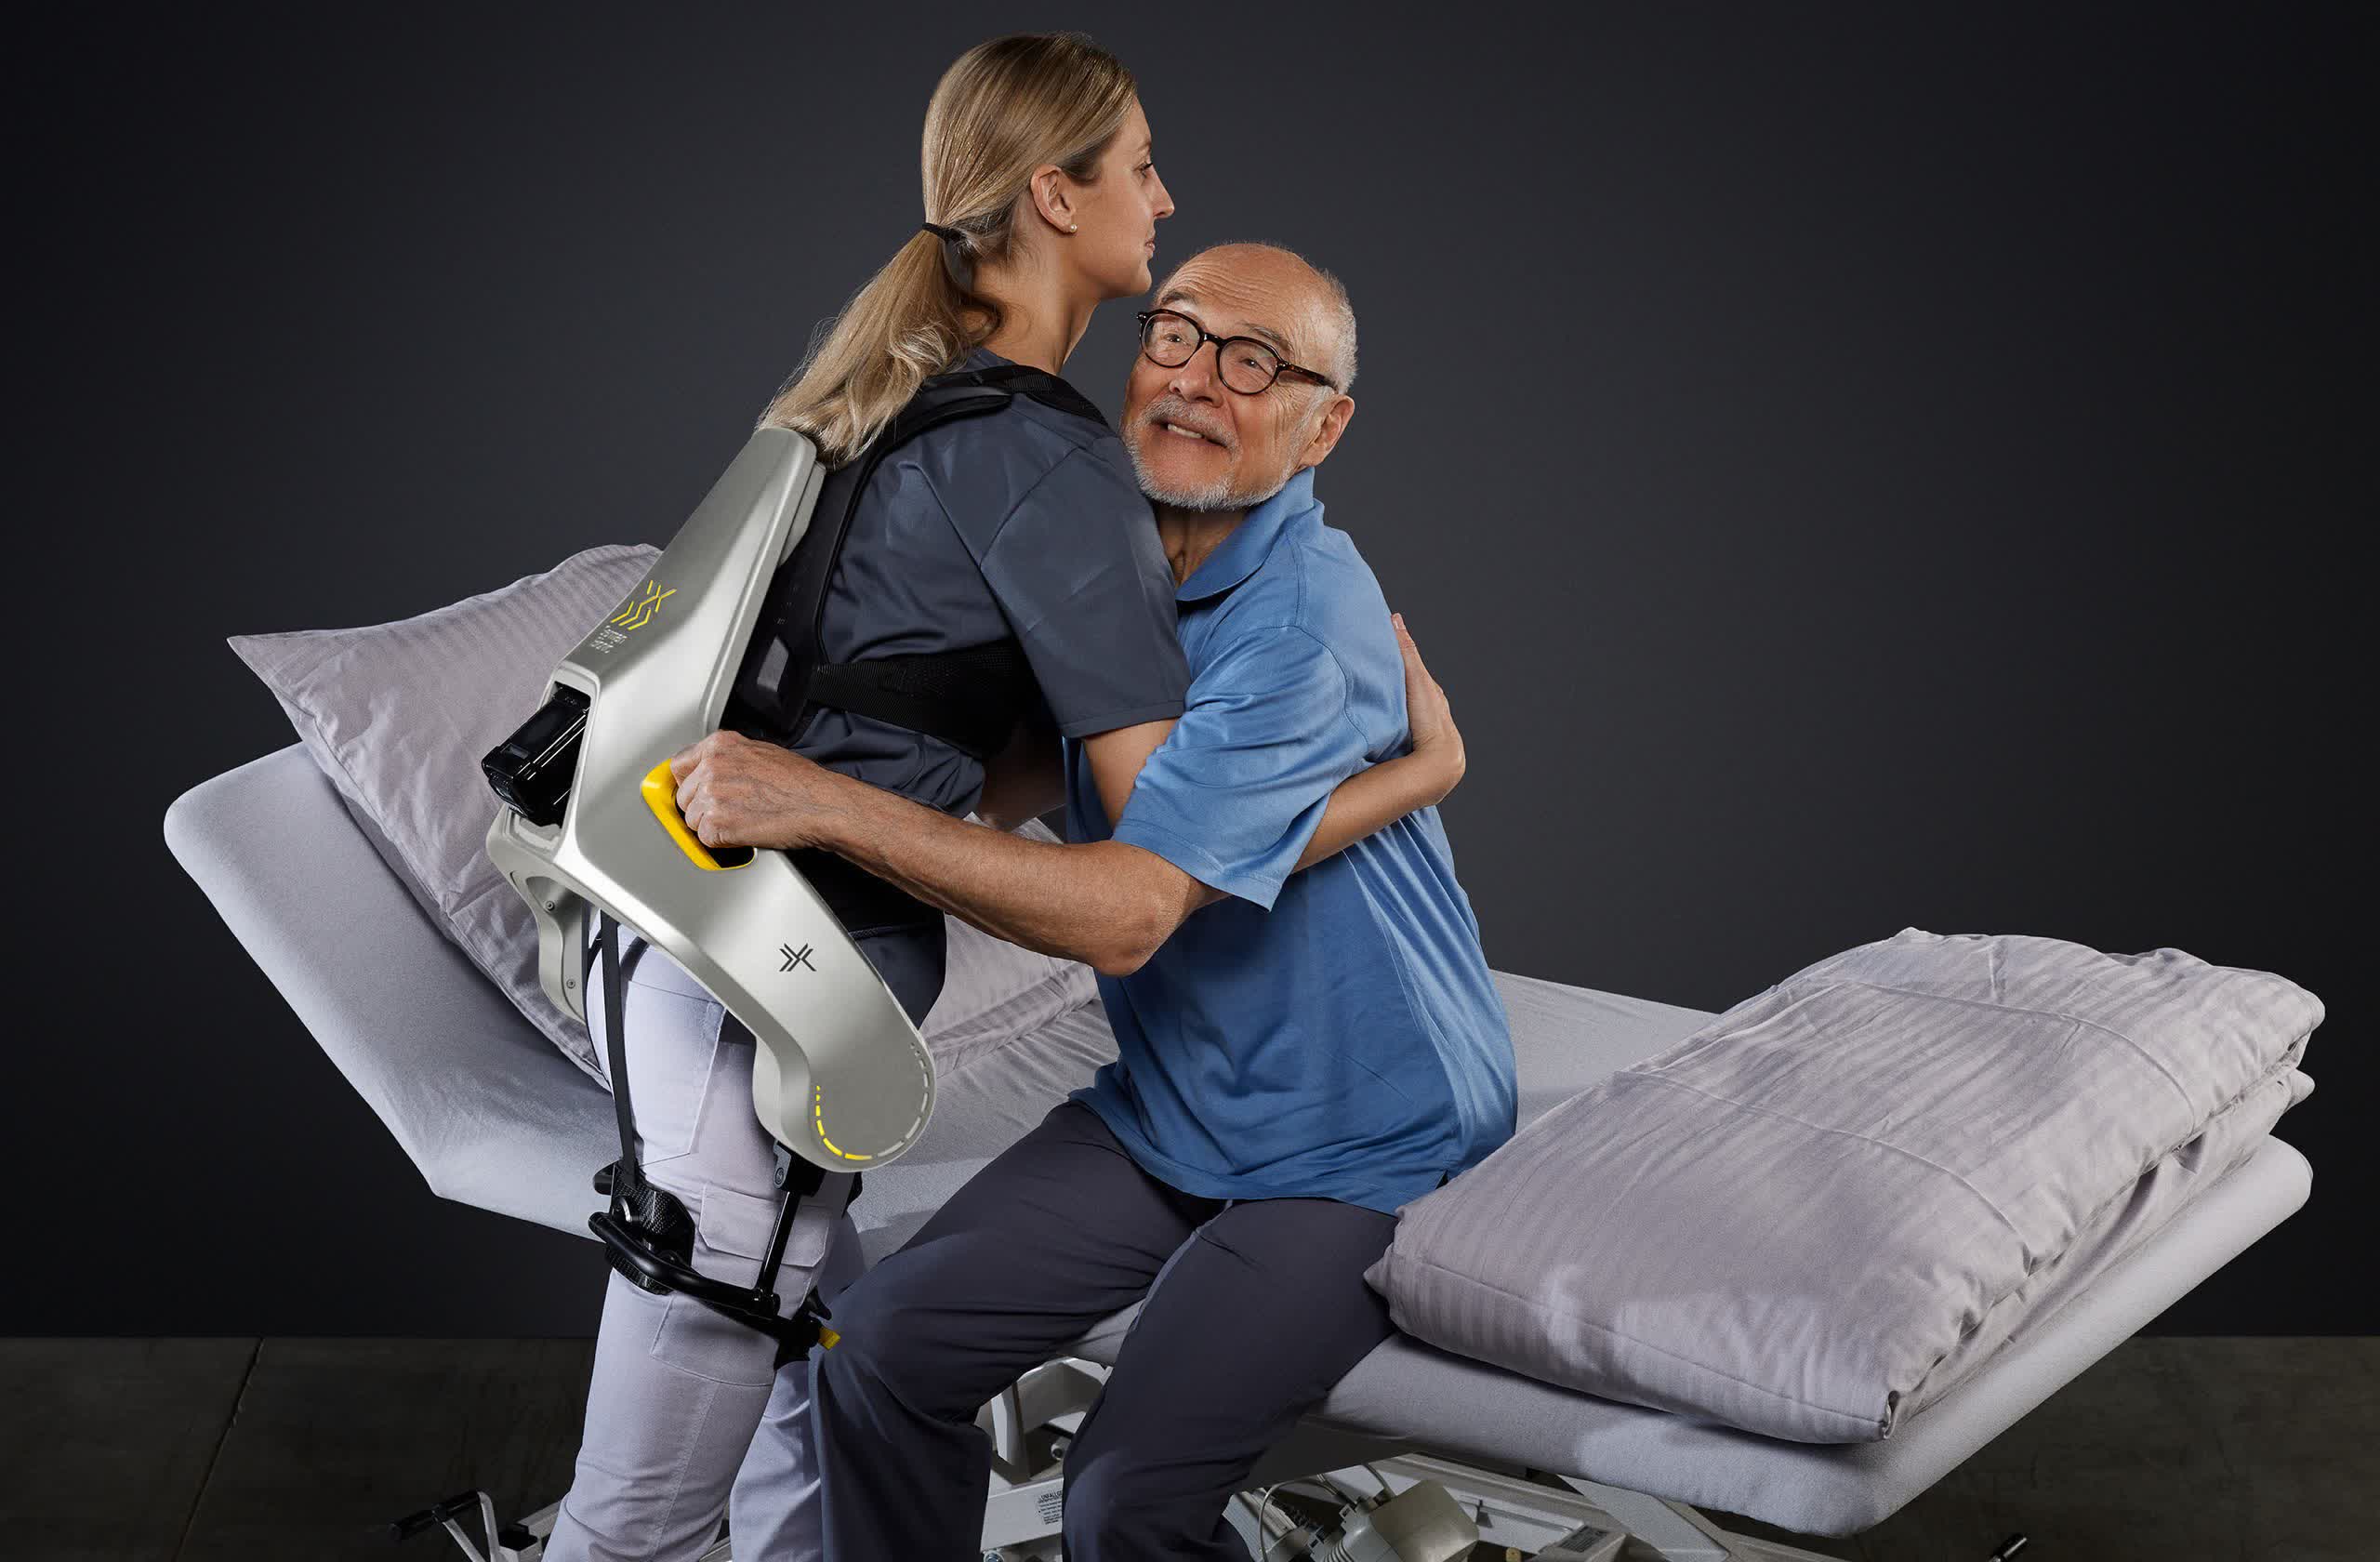 Robotics company debuts exoskeleton for healthcare workers